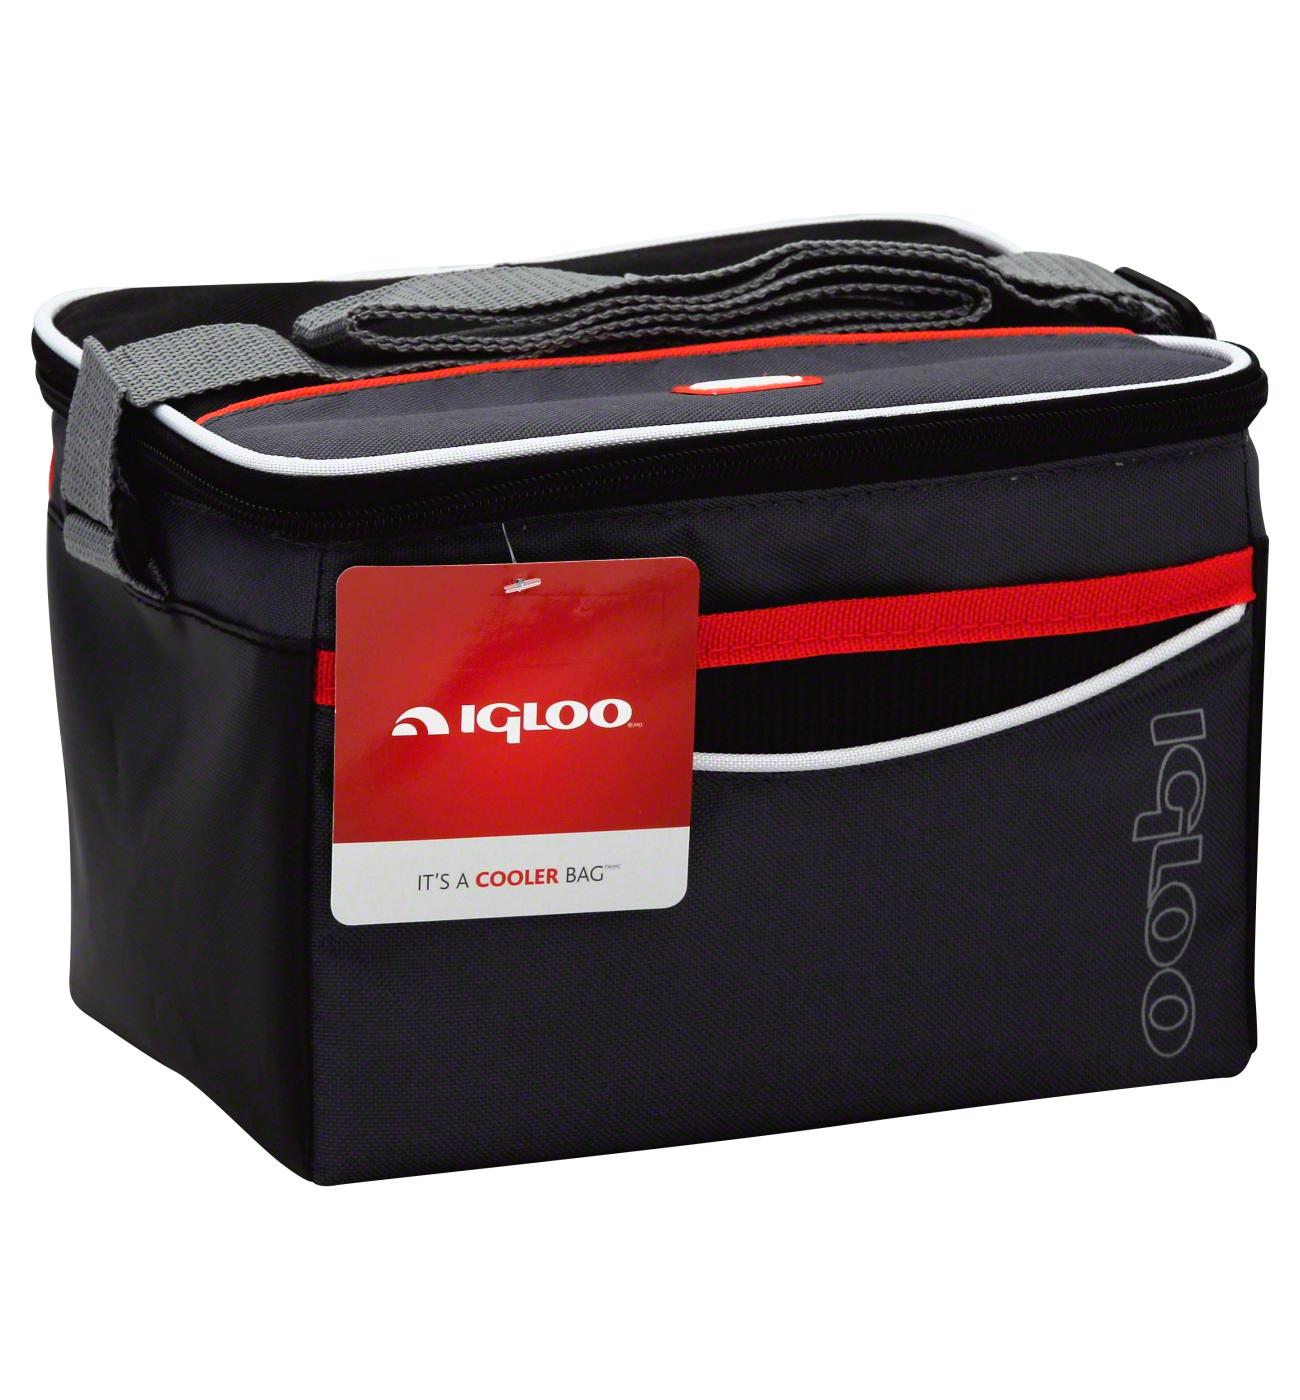 Igloo Collapse & Cool 6 Tech Basic Cooler Bag, Assorted Colors; image 2 of 4